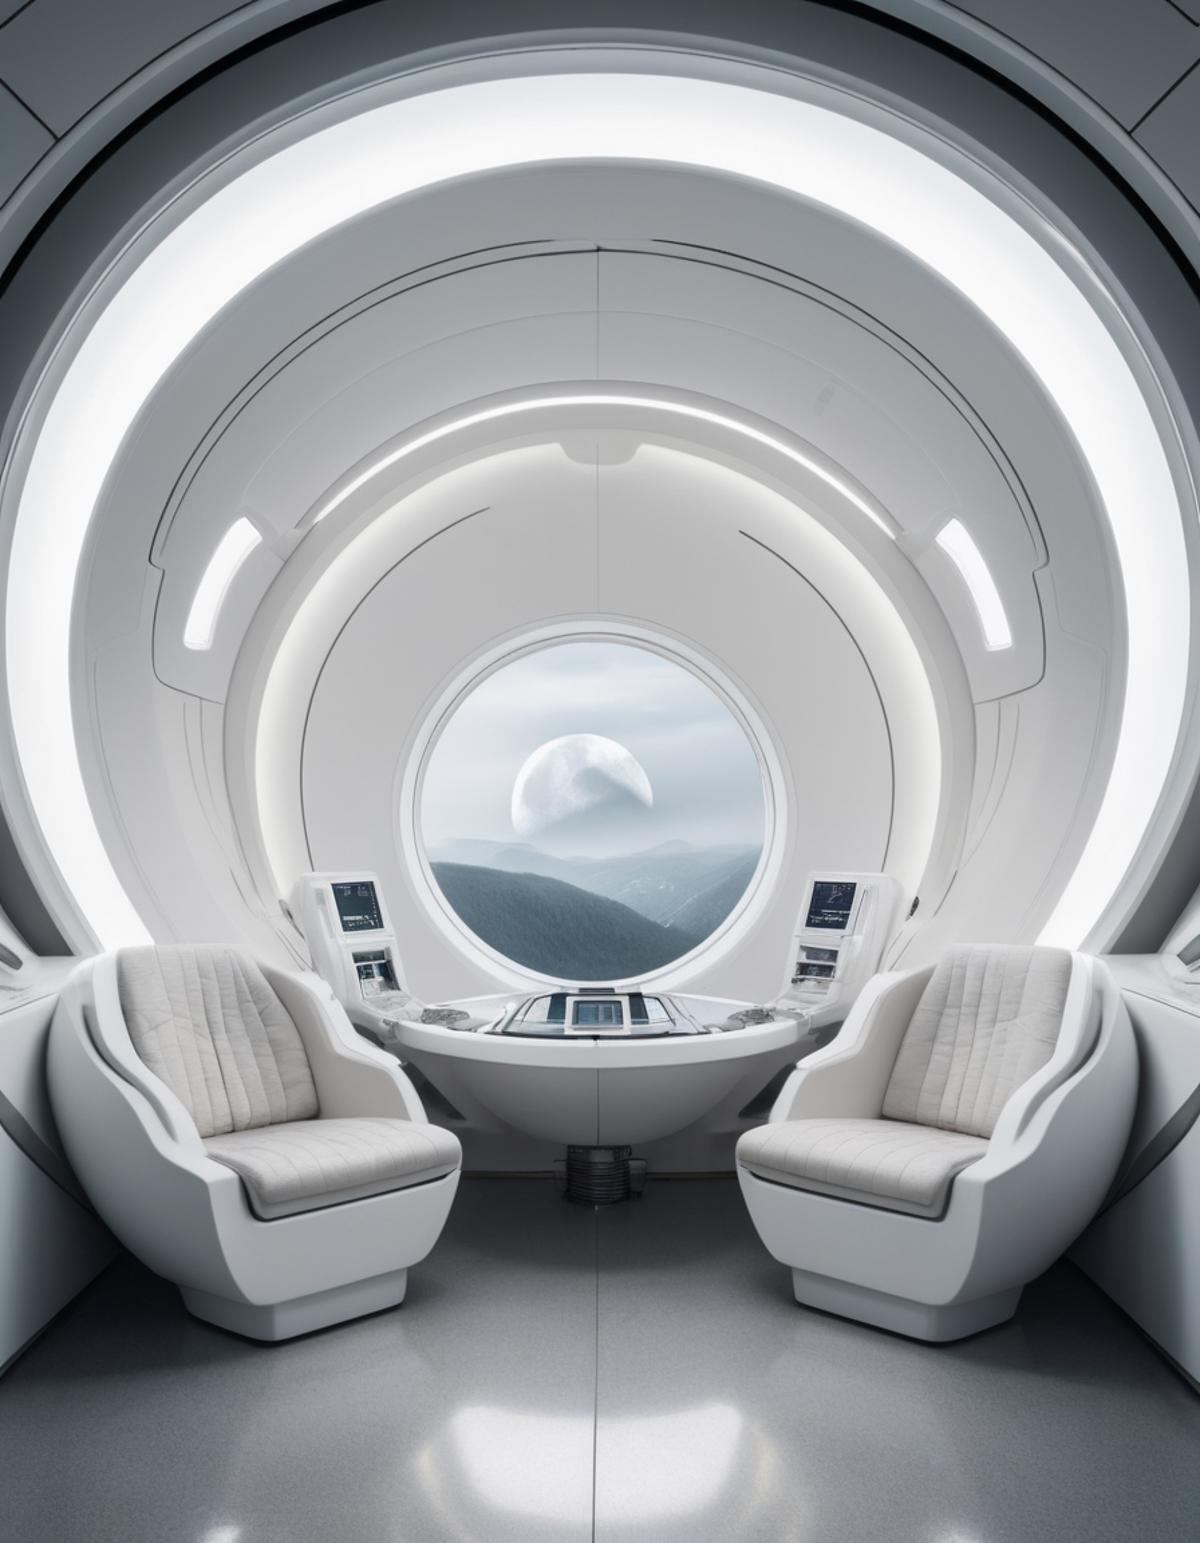 Inside a futuristic vehicle with circular windows, two chairs facing a large window with a moon outside.